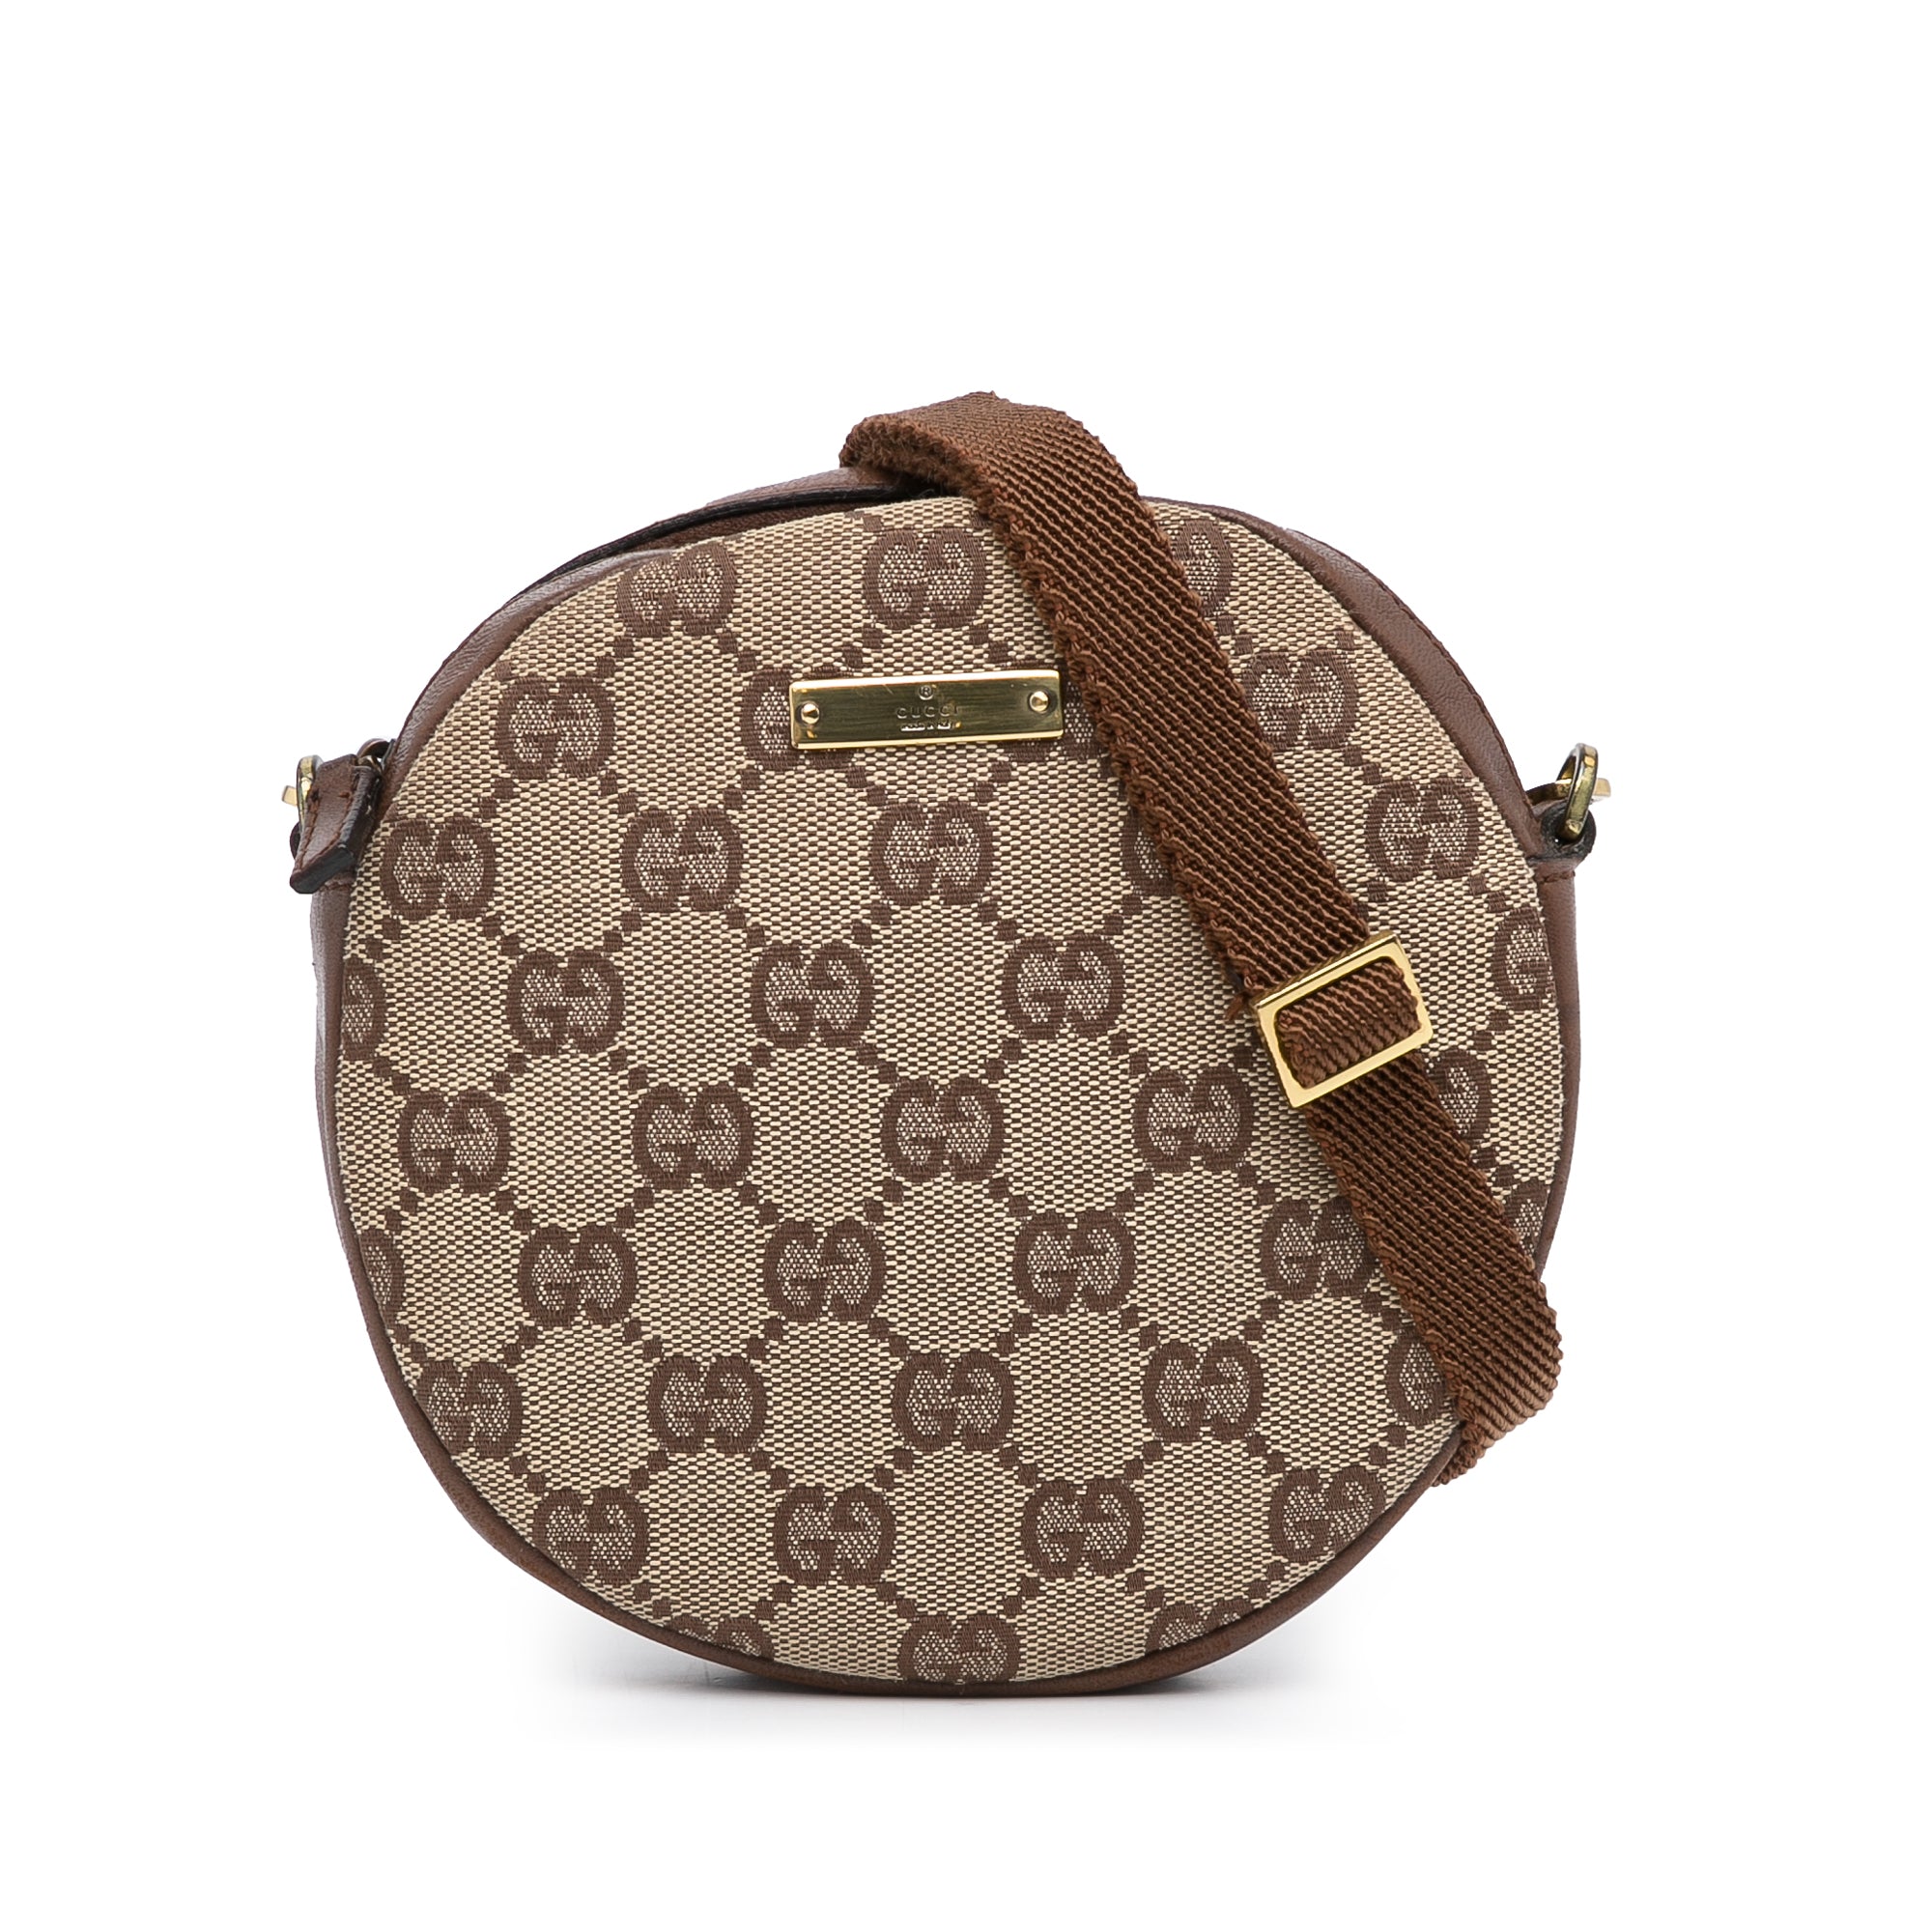 Gucci Boston Bag 1 year update. Alternative to the Louis Vuitton